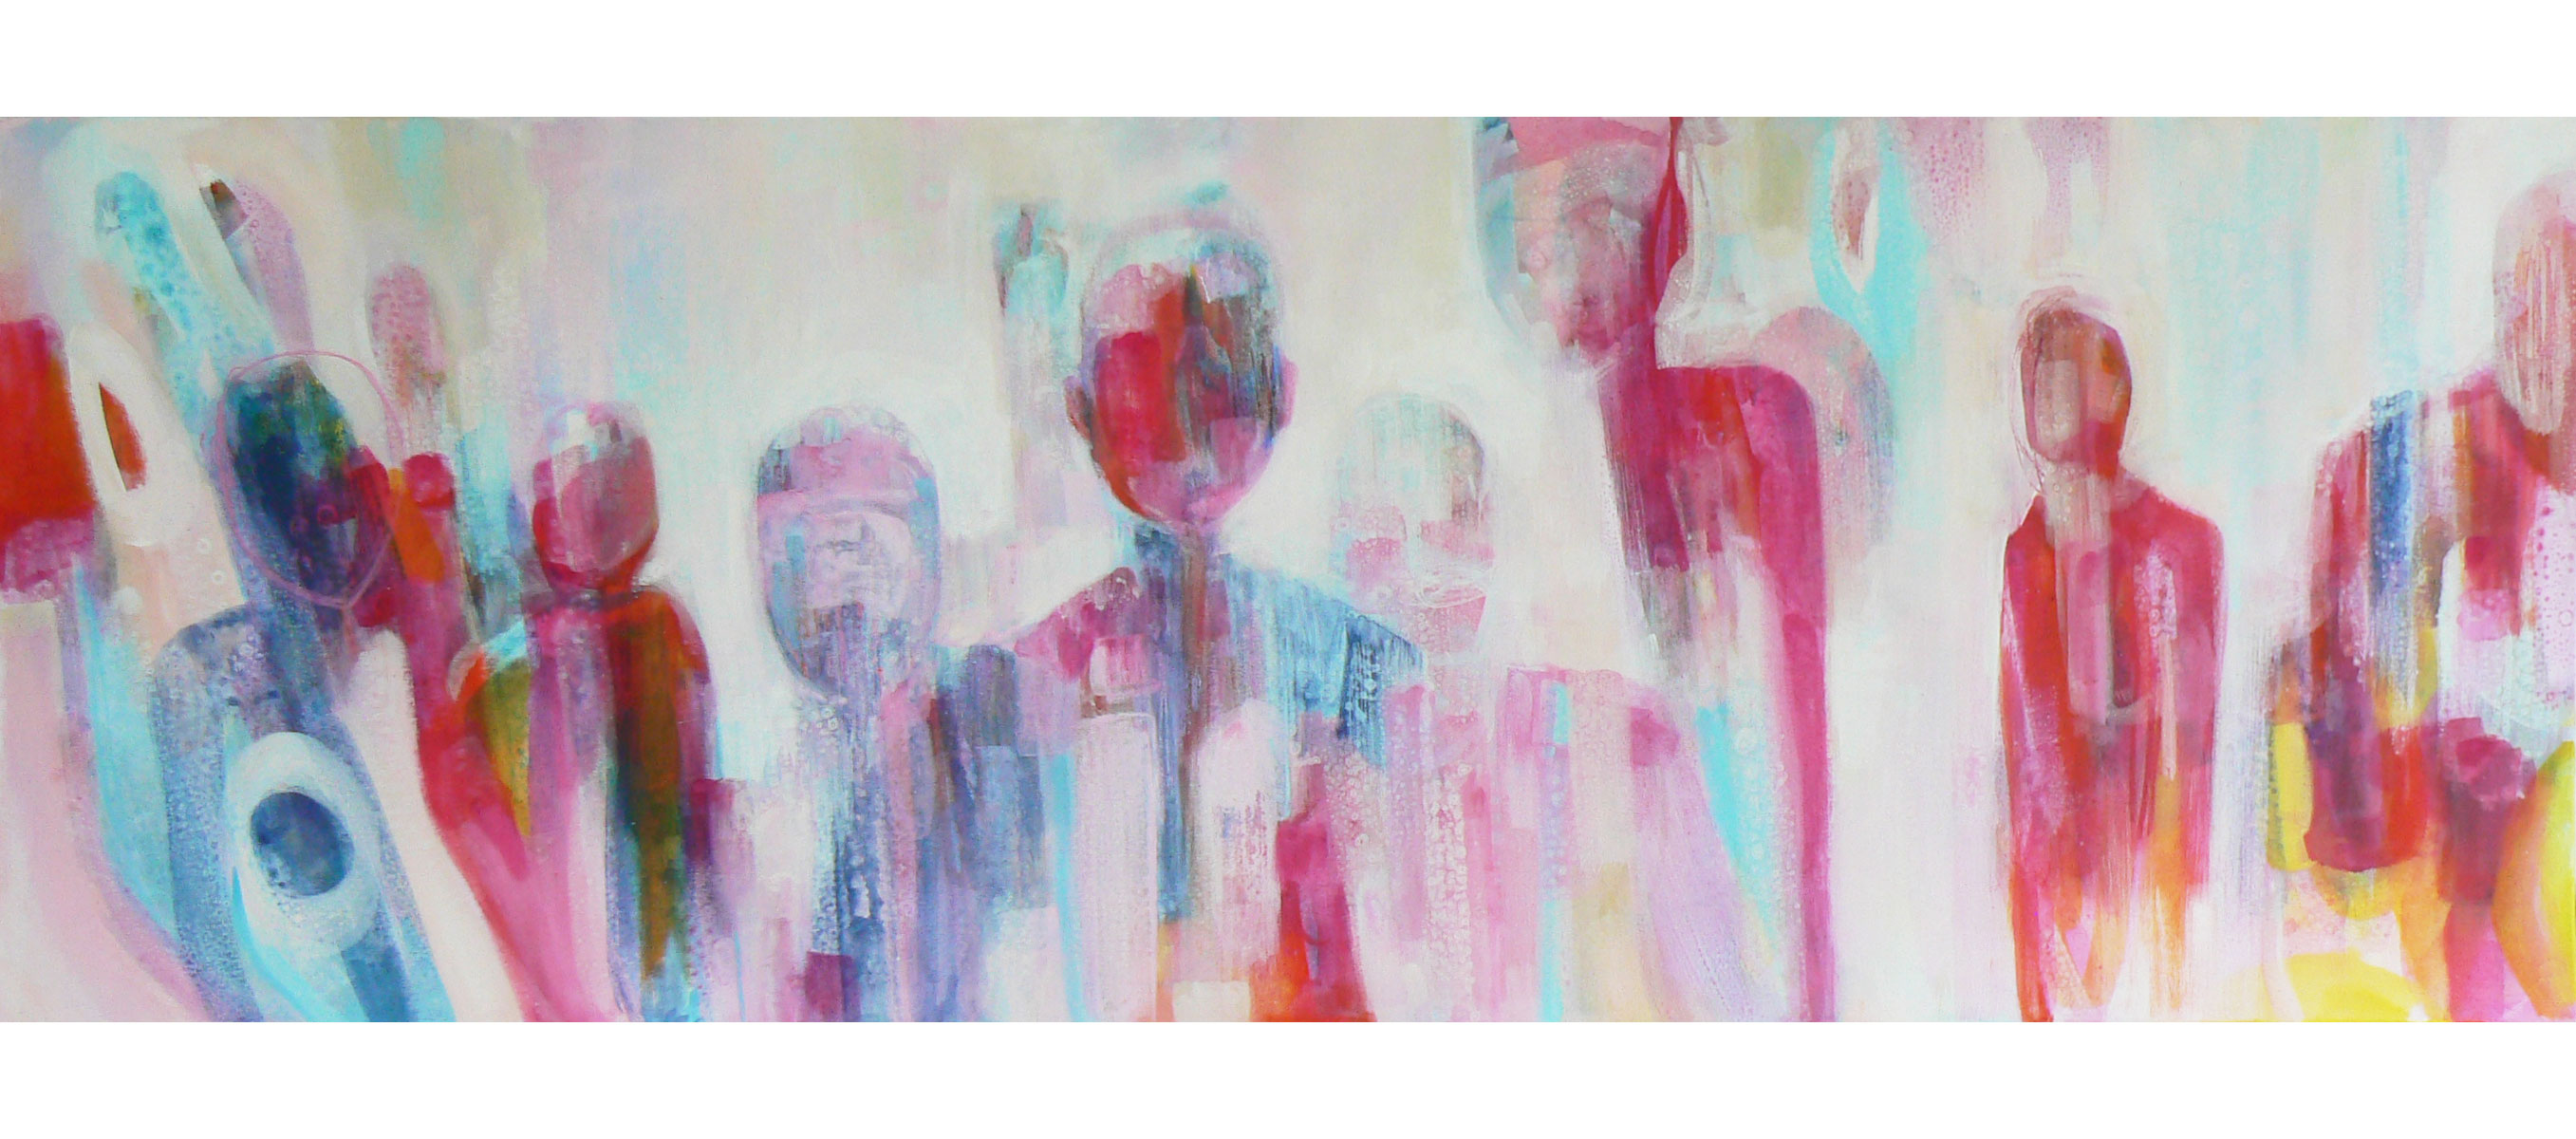 The Lotus Eaters, 2015 Acrylic painting by Carolynne Coulson